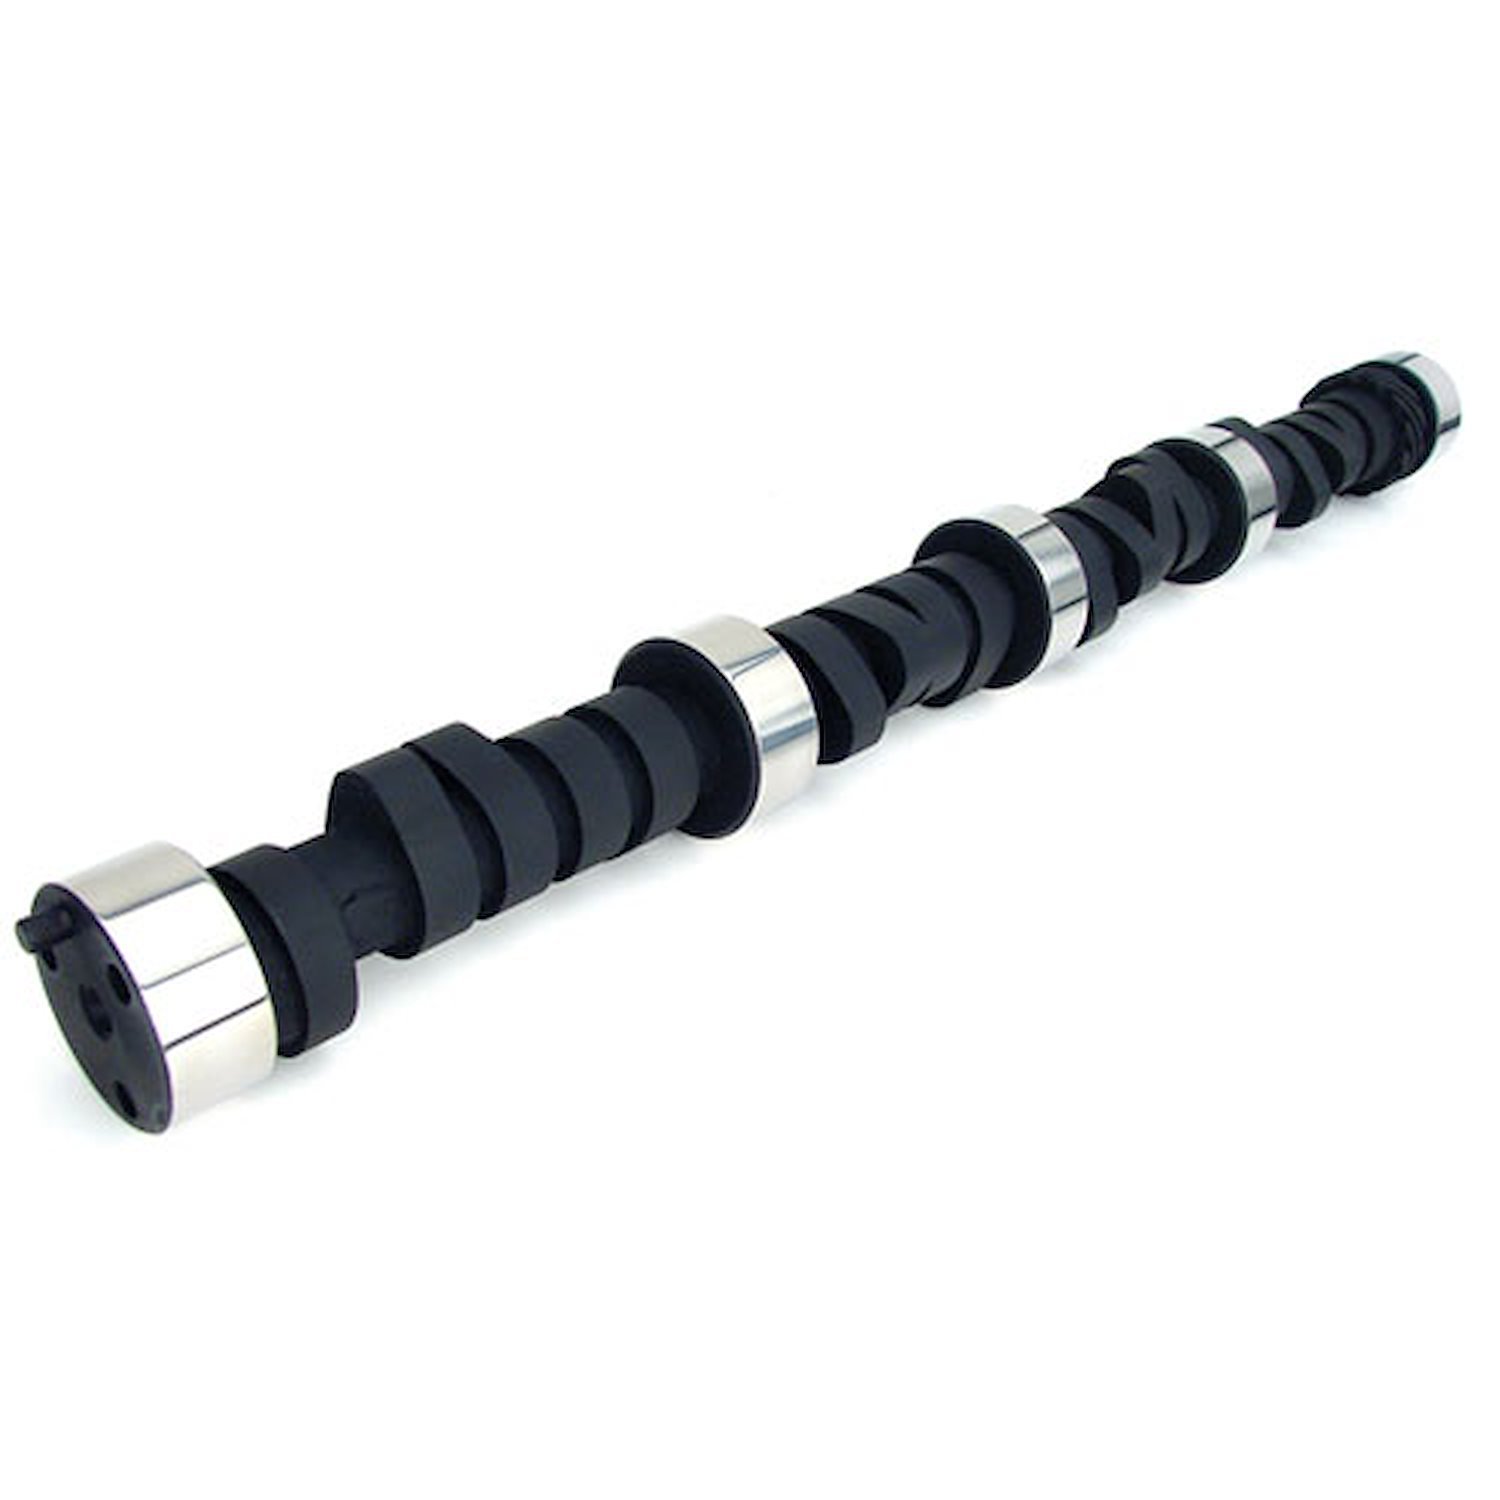 Xtreme Energy 294H Hydraulic Flat Tappet Camshaft Only Lift: .588" /.593" Duration: 294°/306° RPM Range: 2800-7000